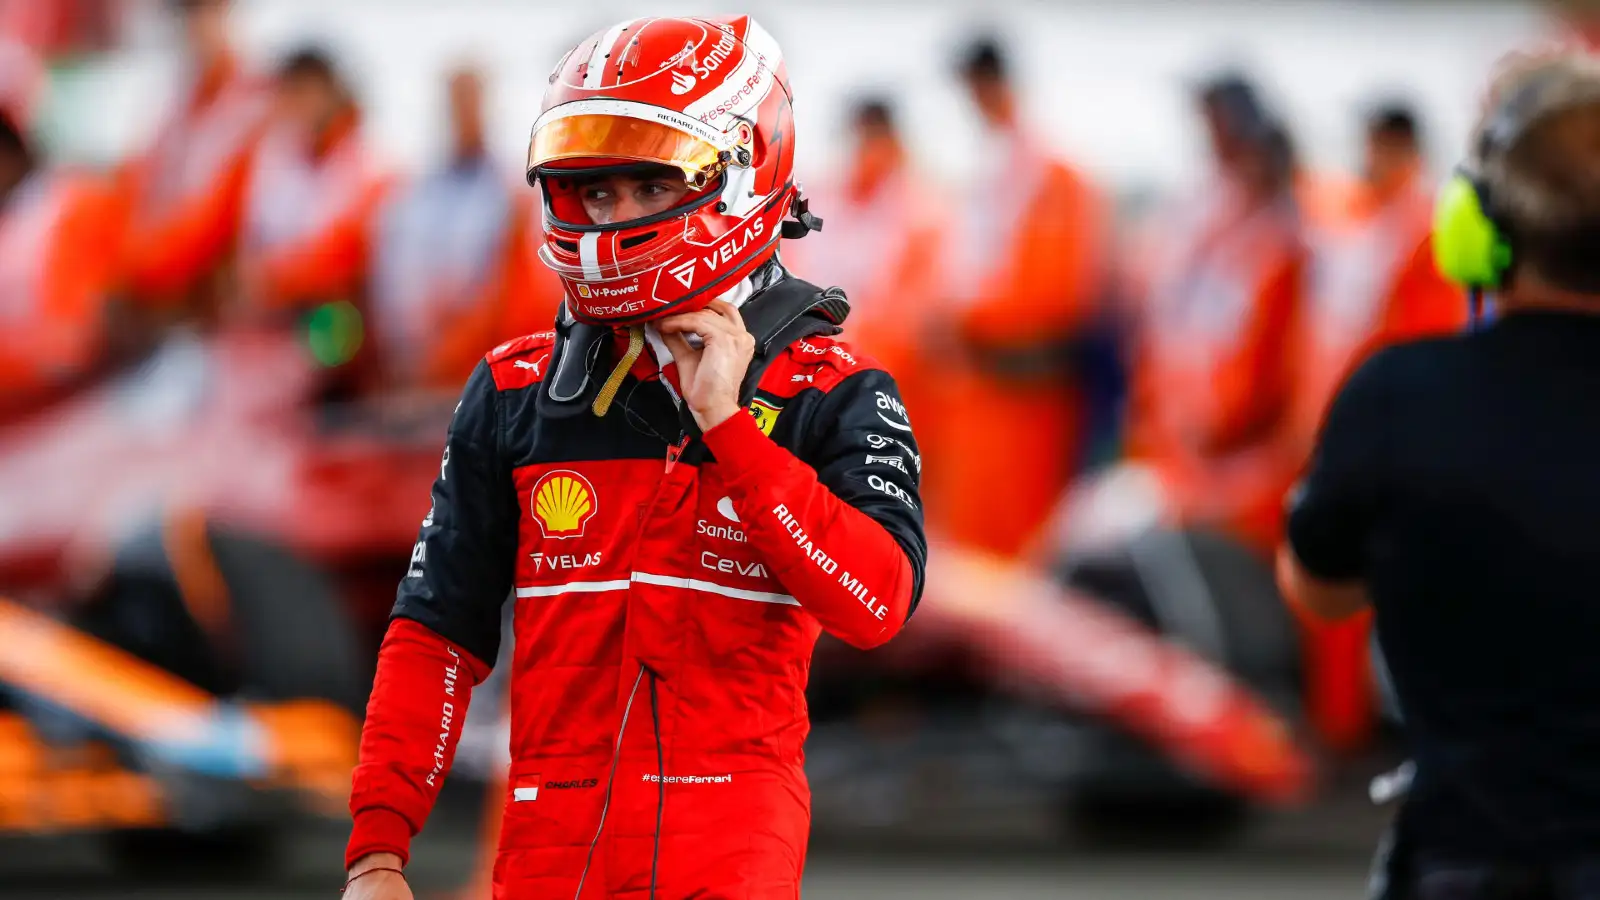 Ferrari's Charles Leclerc walks away from his car at the end of the British Grand Prix. Silverstone, July 2022.